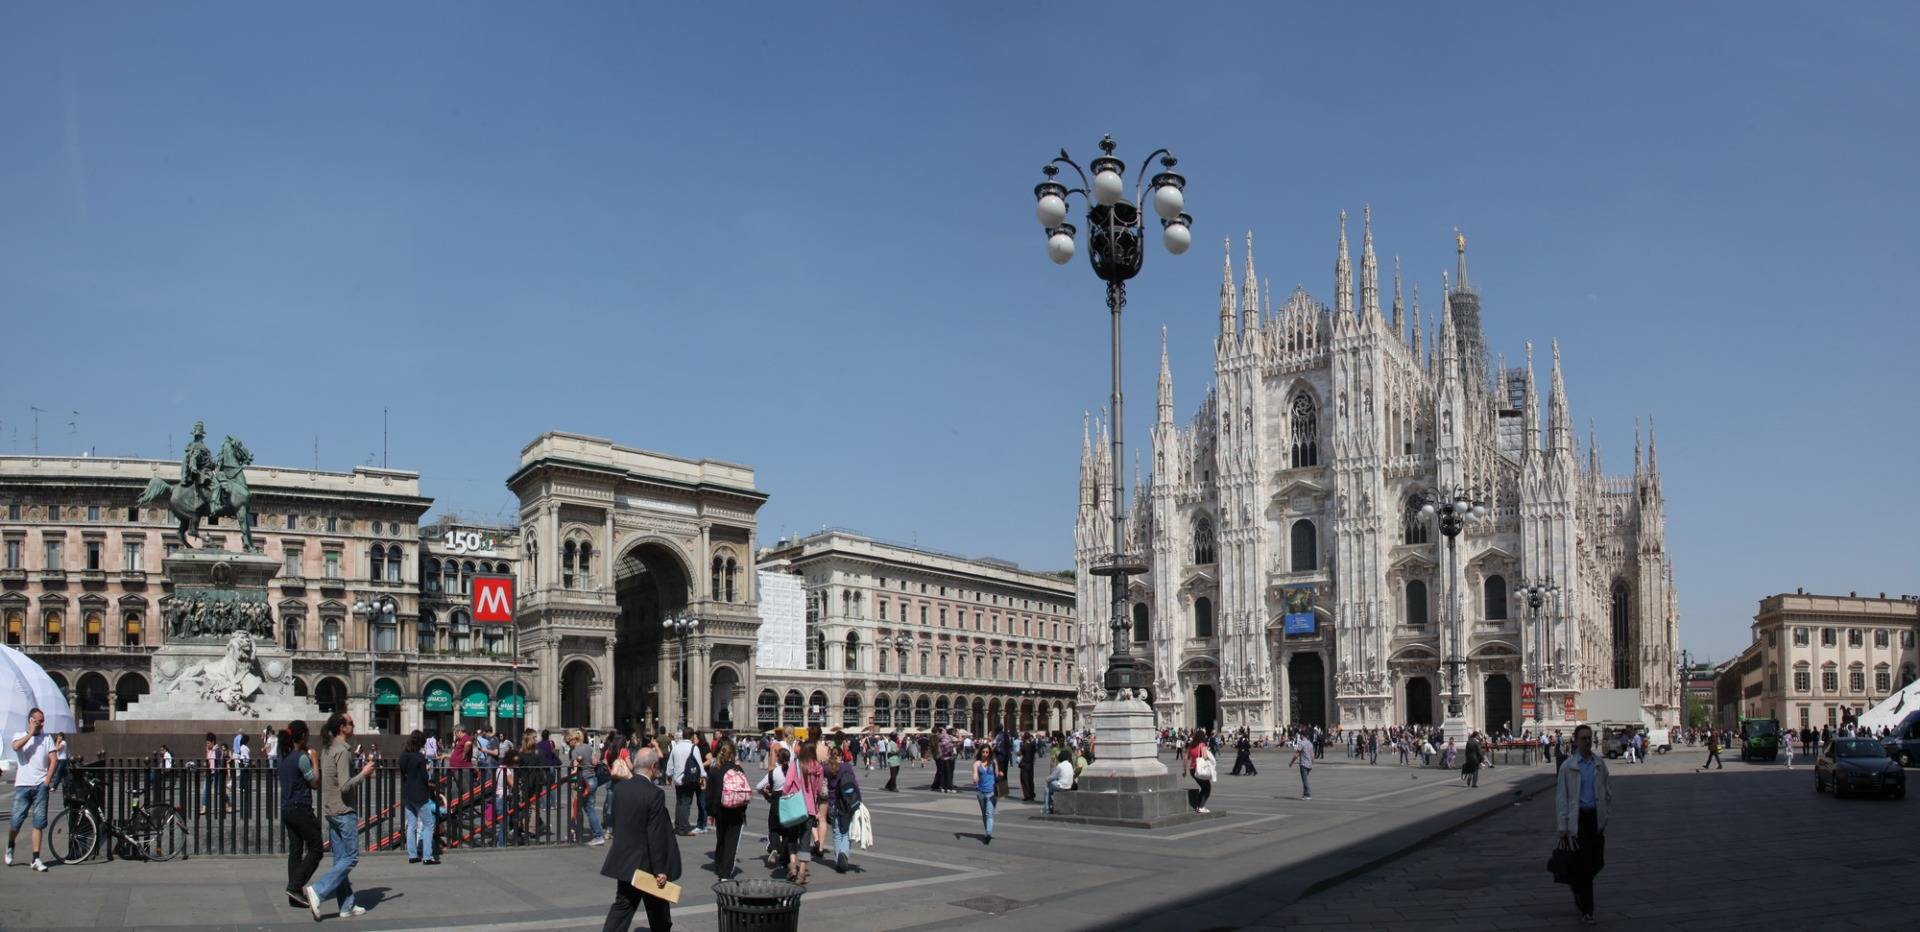 Milan is a city of beauty and fashion